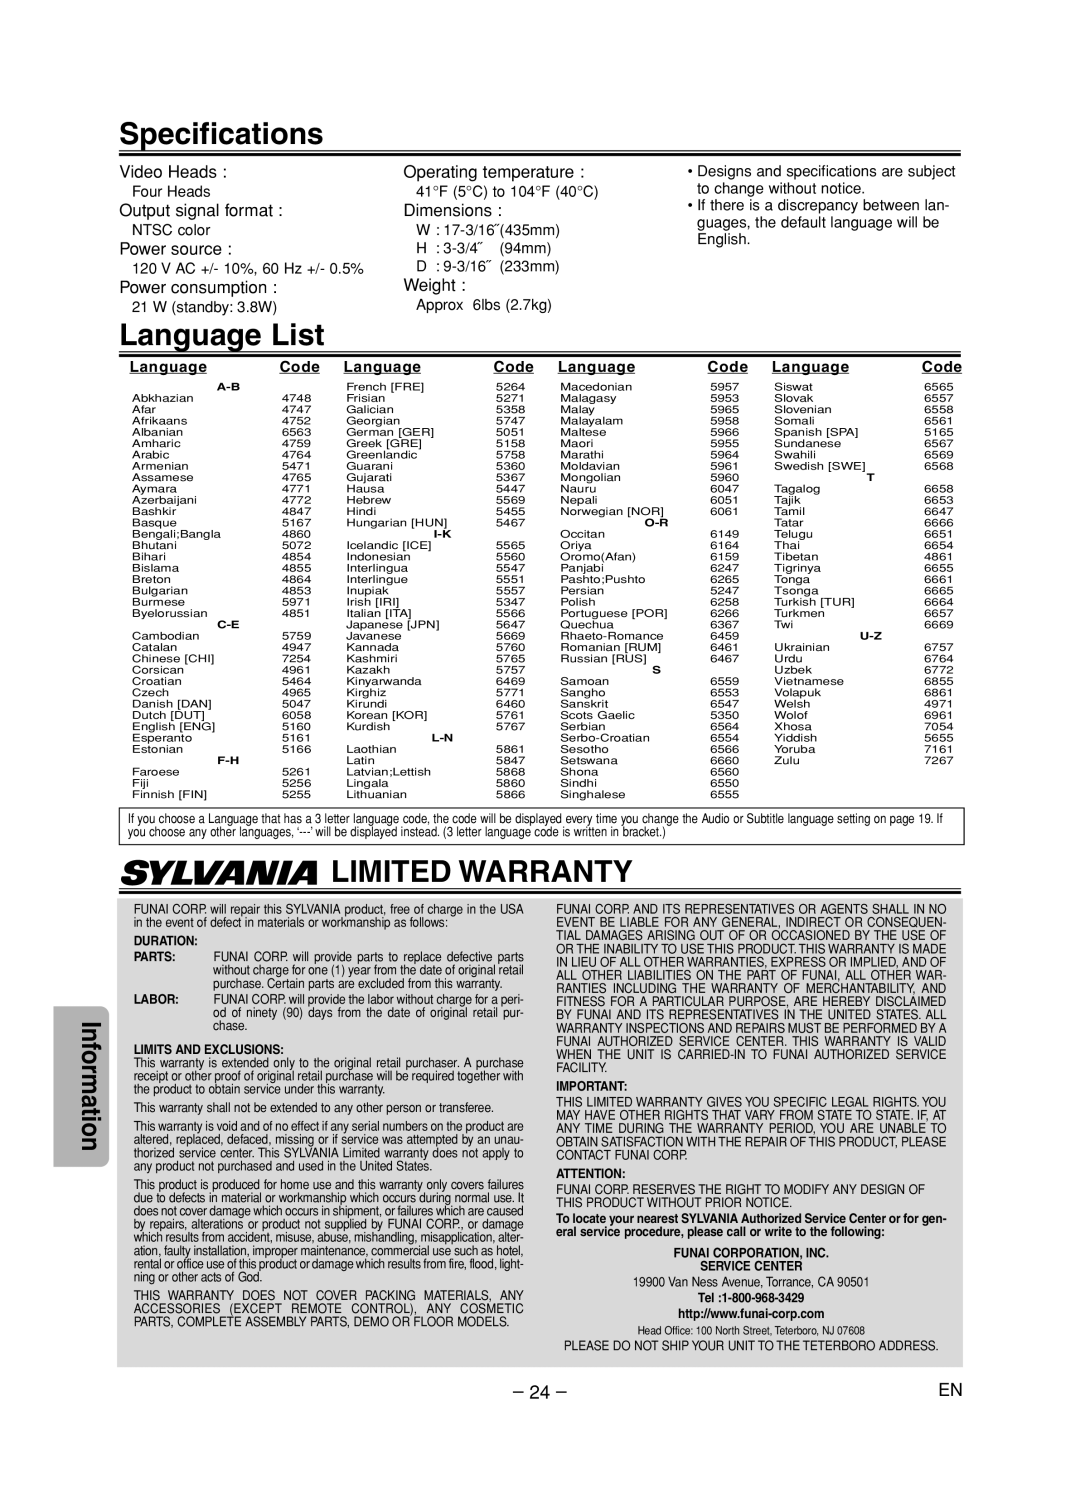 Sylvania DVC860F Specifications, Language List, Limited Warranty, Information, Video Heads, Operating temperature, Weight 